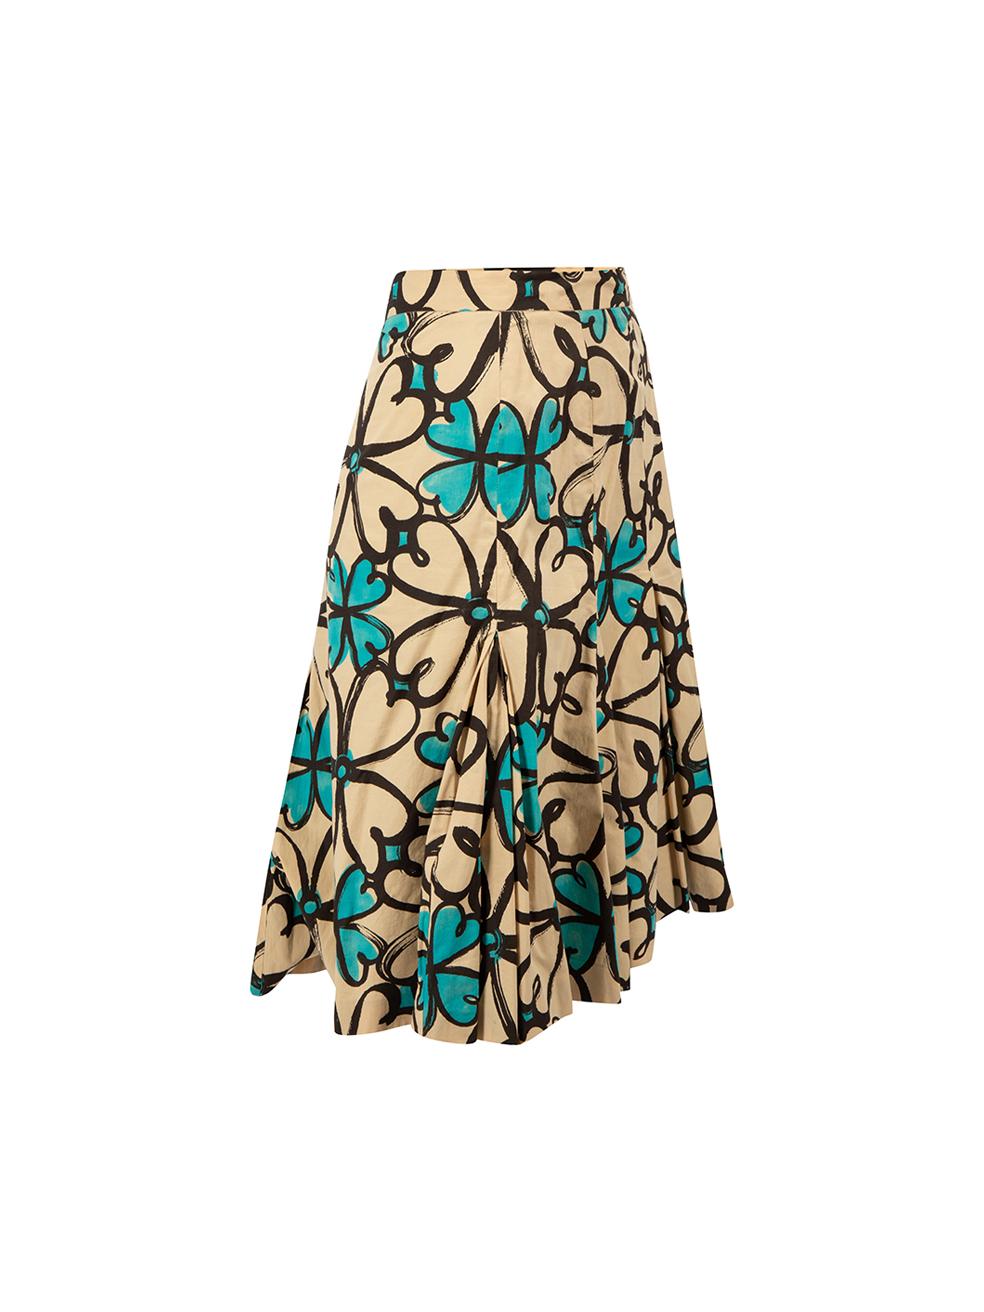 CONDITION is Good. Minor wear to skirt is evident. Light wear to the rear hook and eye fastening with the hook missing on this used Moschino Cheap & Chic designer resale item.



Details


Beige

Cotton

Flared skirt

Knee length

Oversized floral